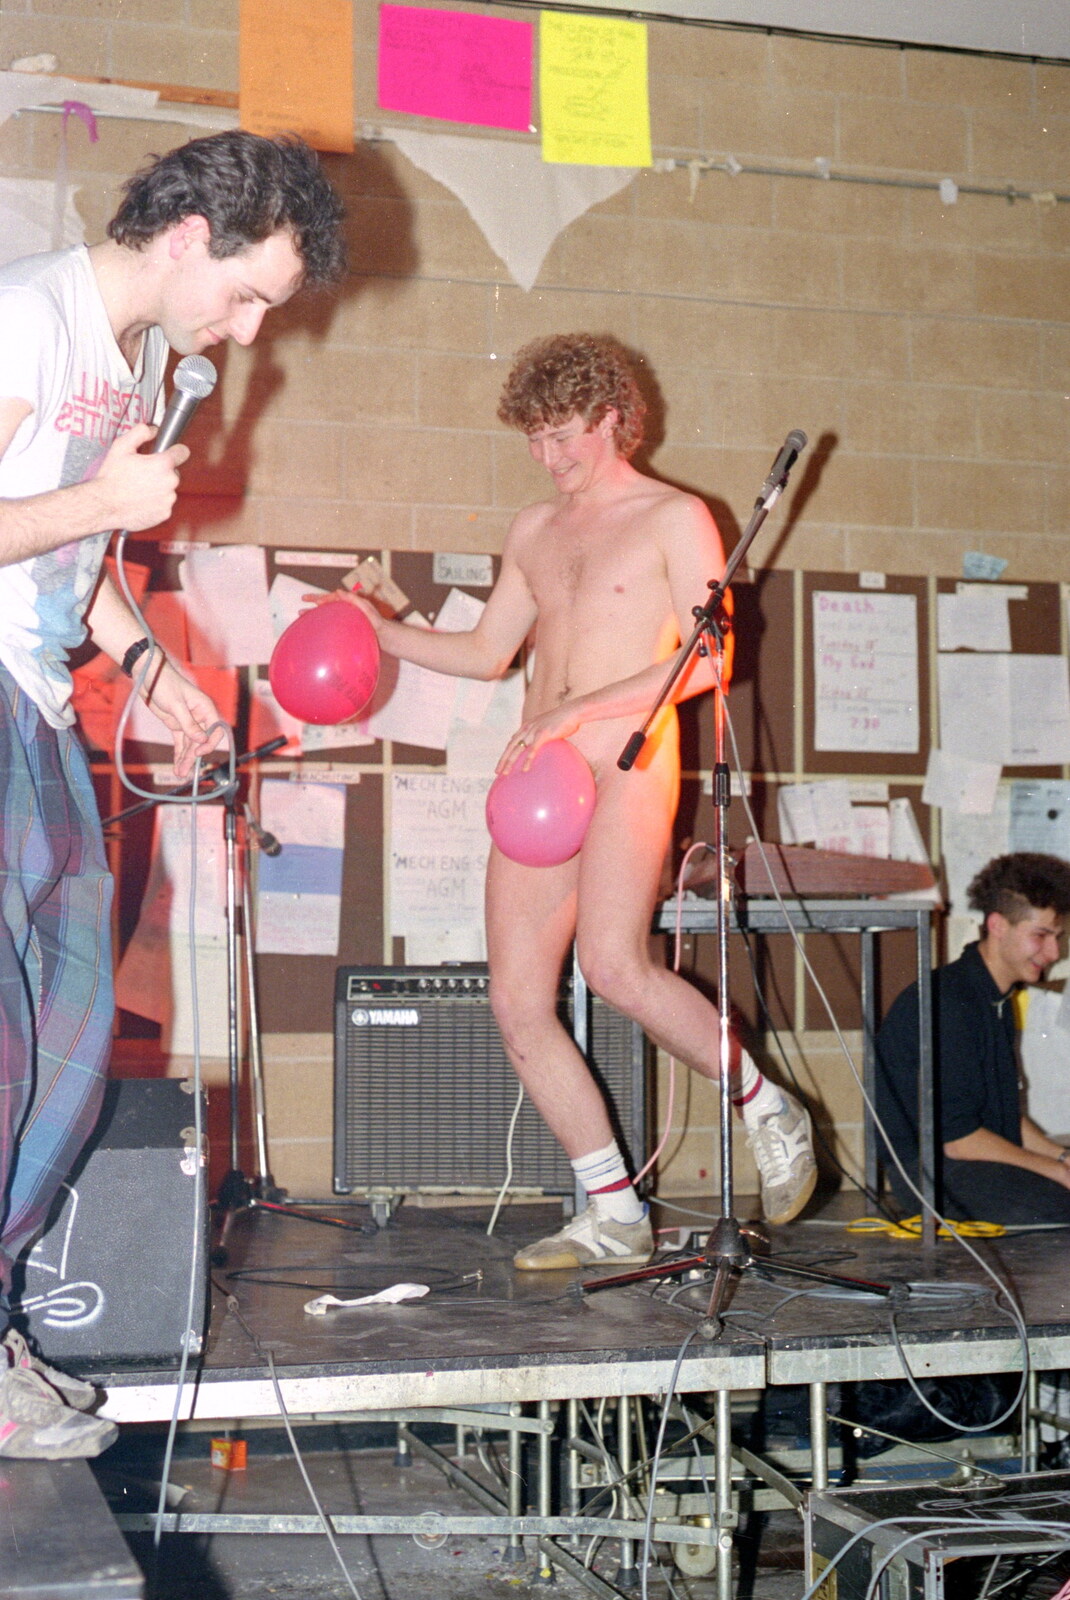 There's a naked balloon dance on stage from Uni: The PPSU "Jazz" RAG Review and Charity Auction, Plymouth, Devon - 19th February 1986